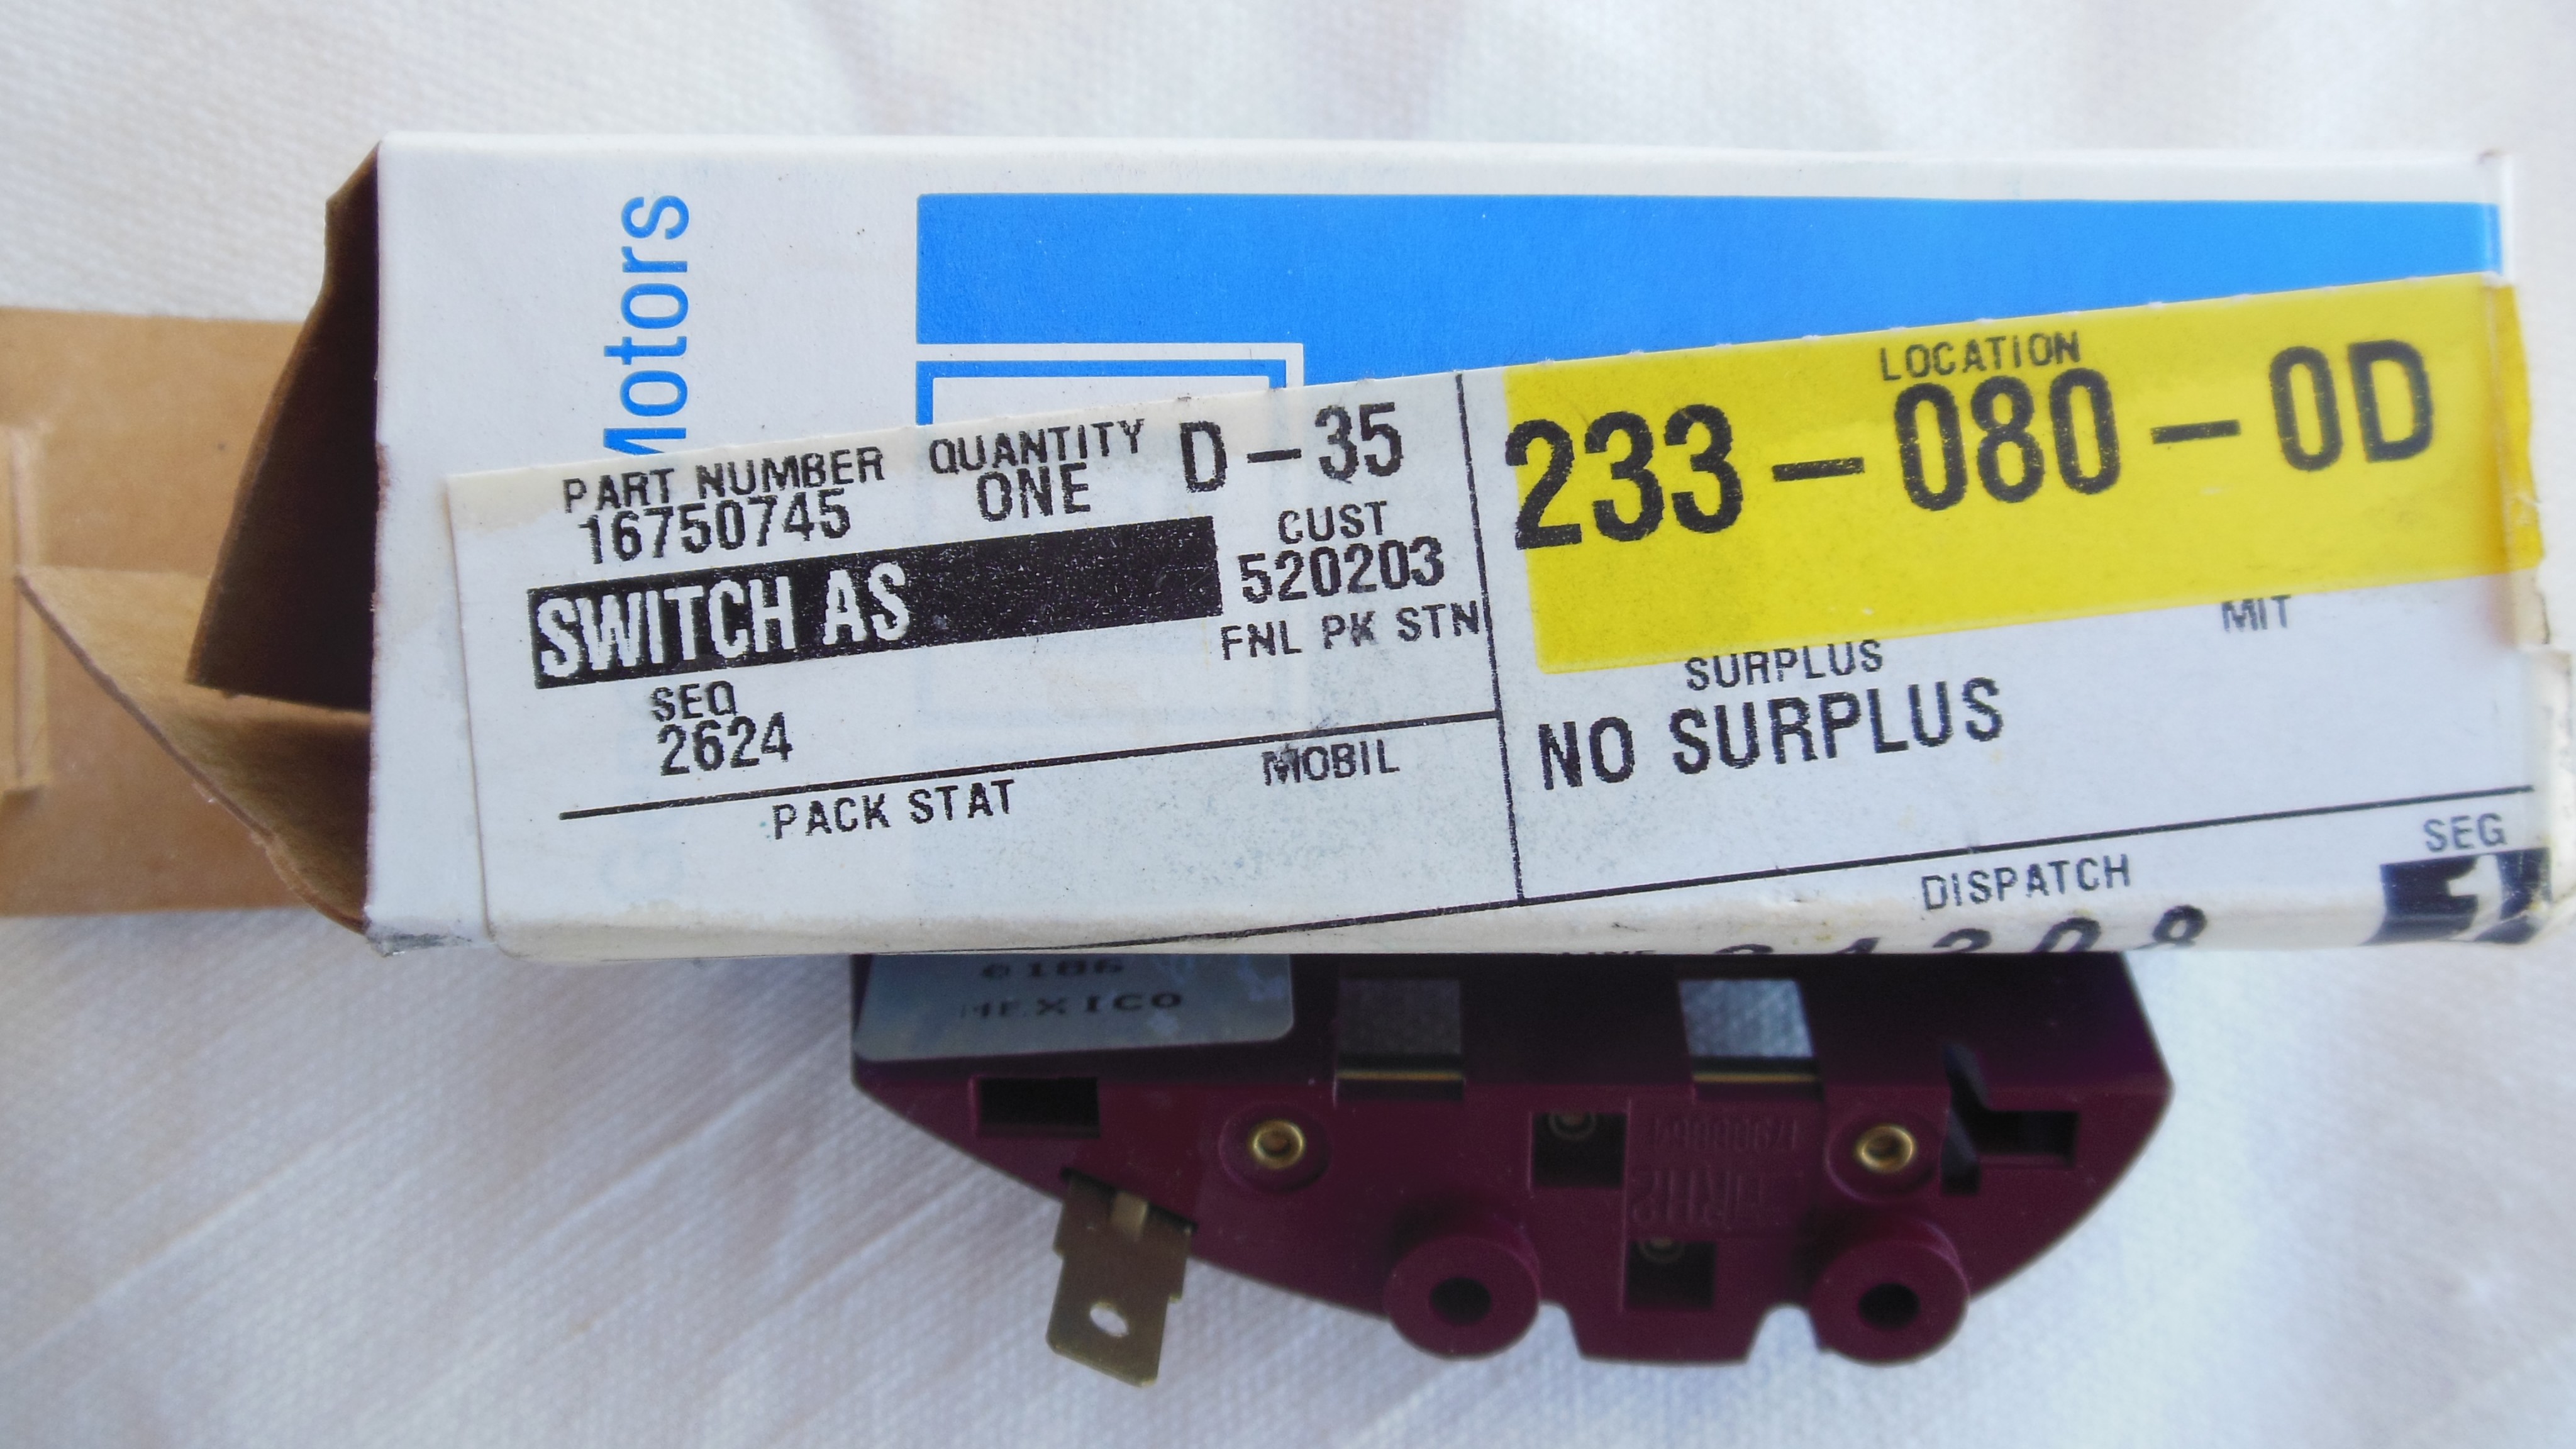 16750745, Switch GM part